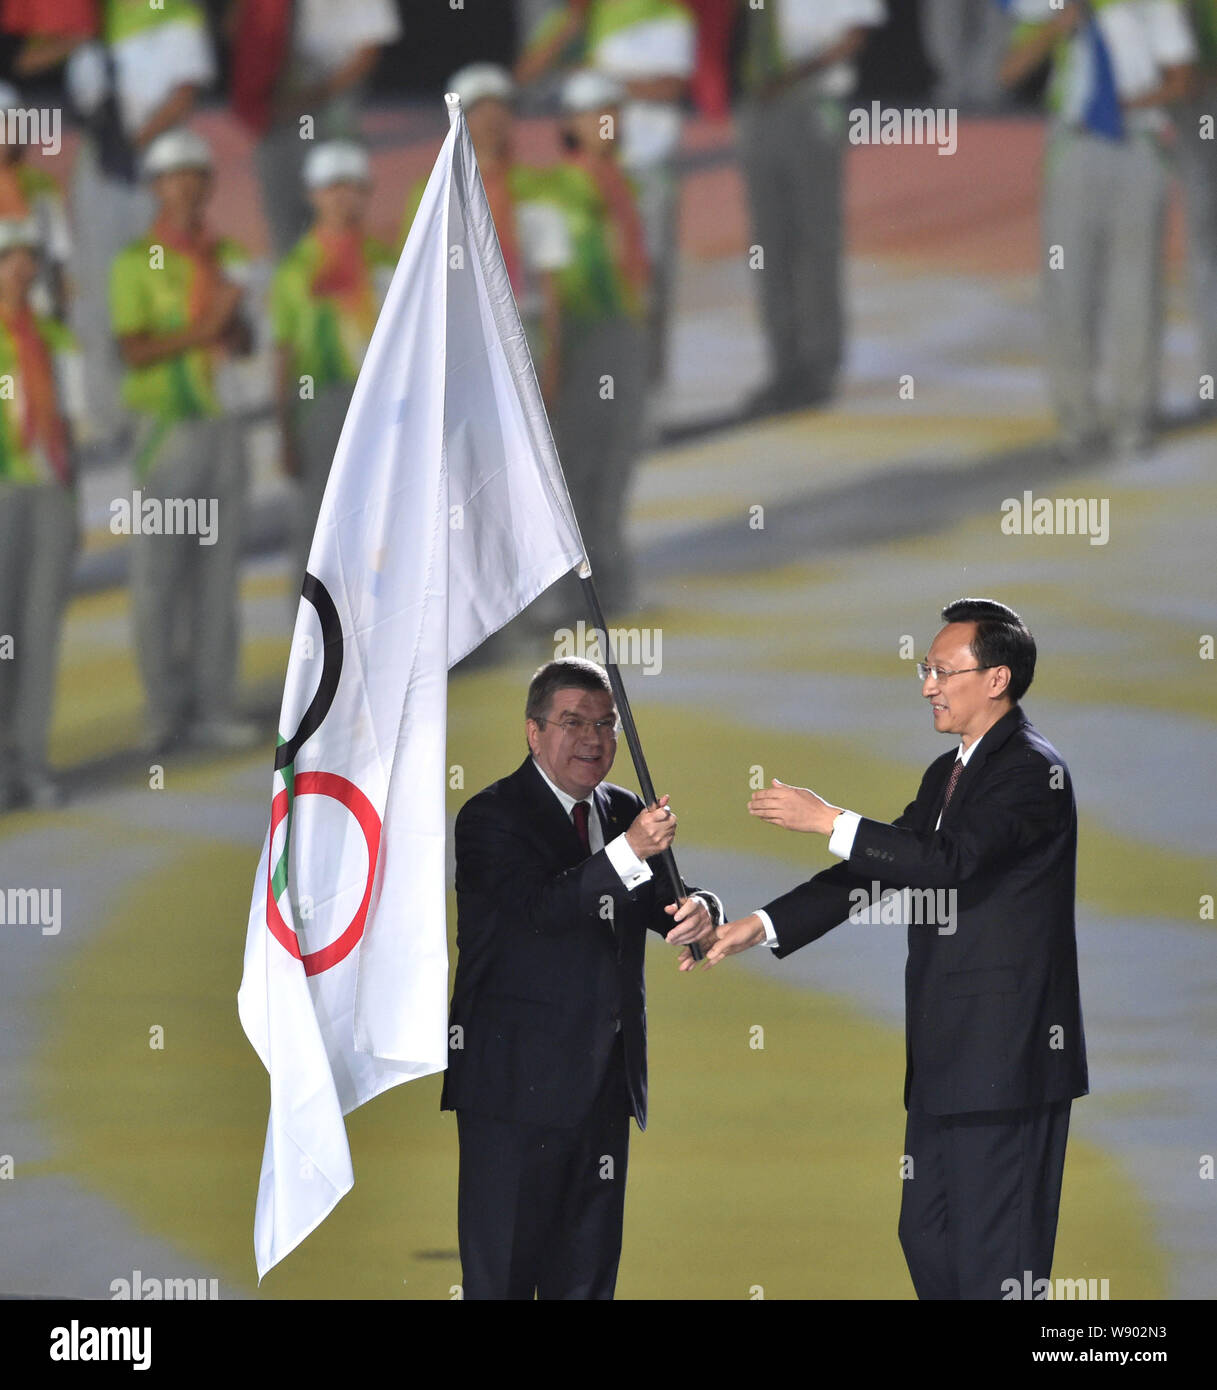 Thomas Bach, left, President of the International Olympic Committee (IOC), delivers the Olympic flag to Li Xueyong, President of the Nanjing Youth Oly Stock Photo